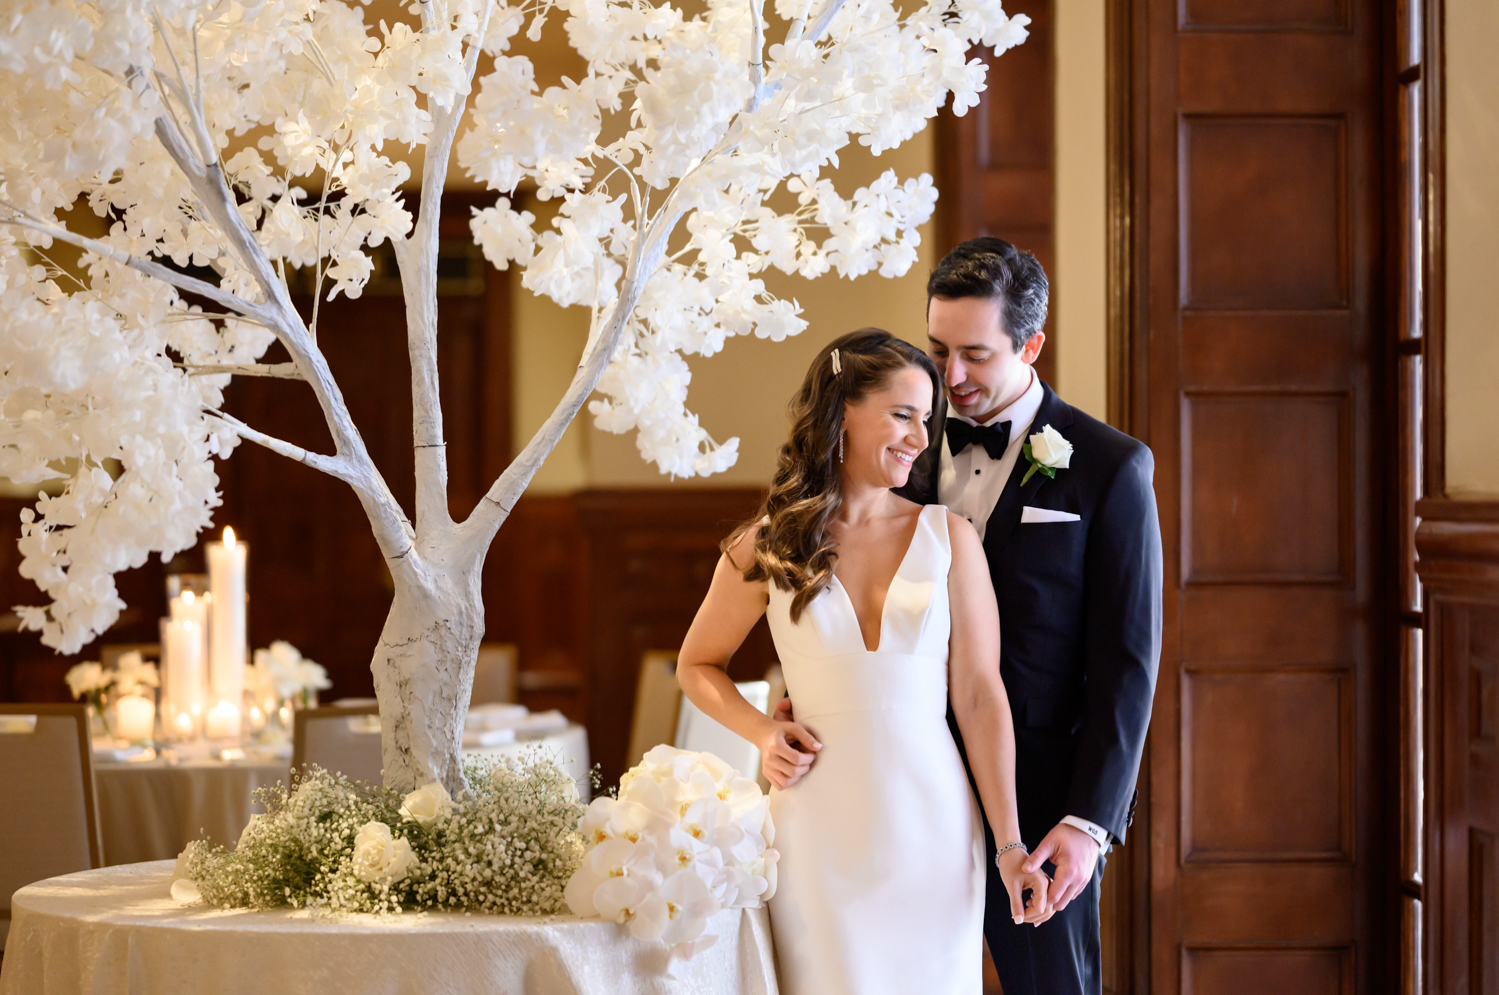 A portrait of the bride and groom in the Driskill hotel in front of a white tree decoration and florals.